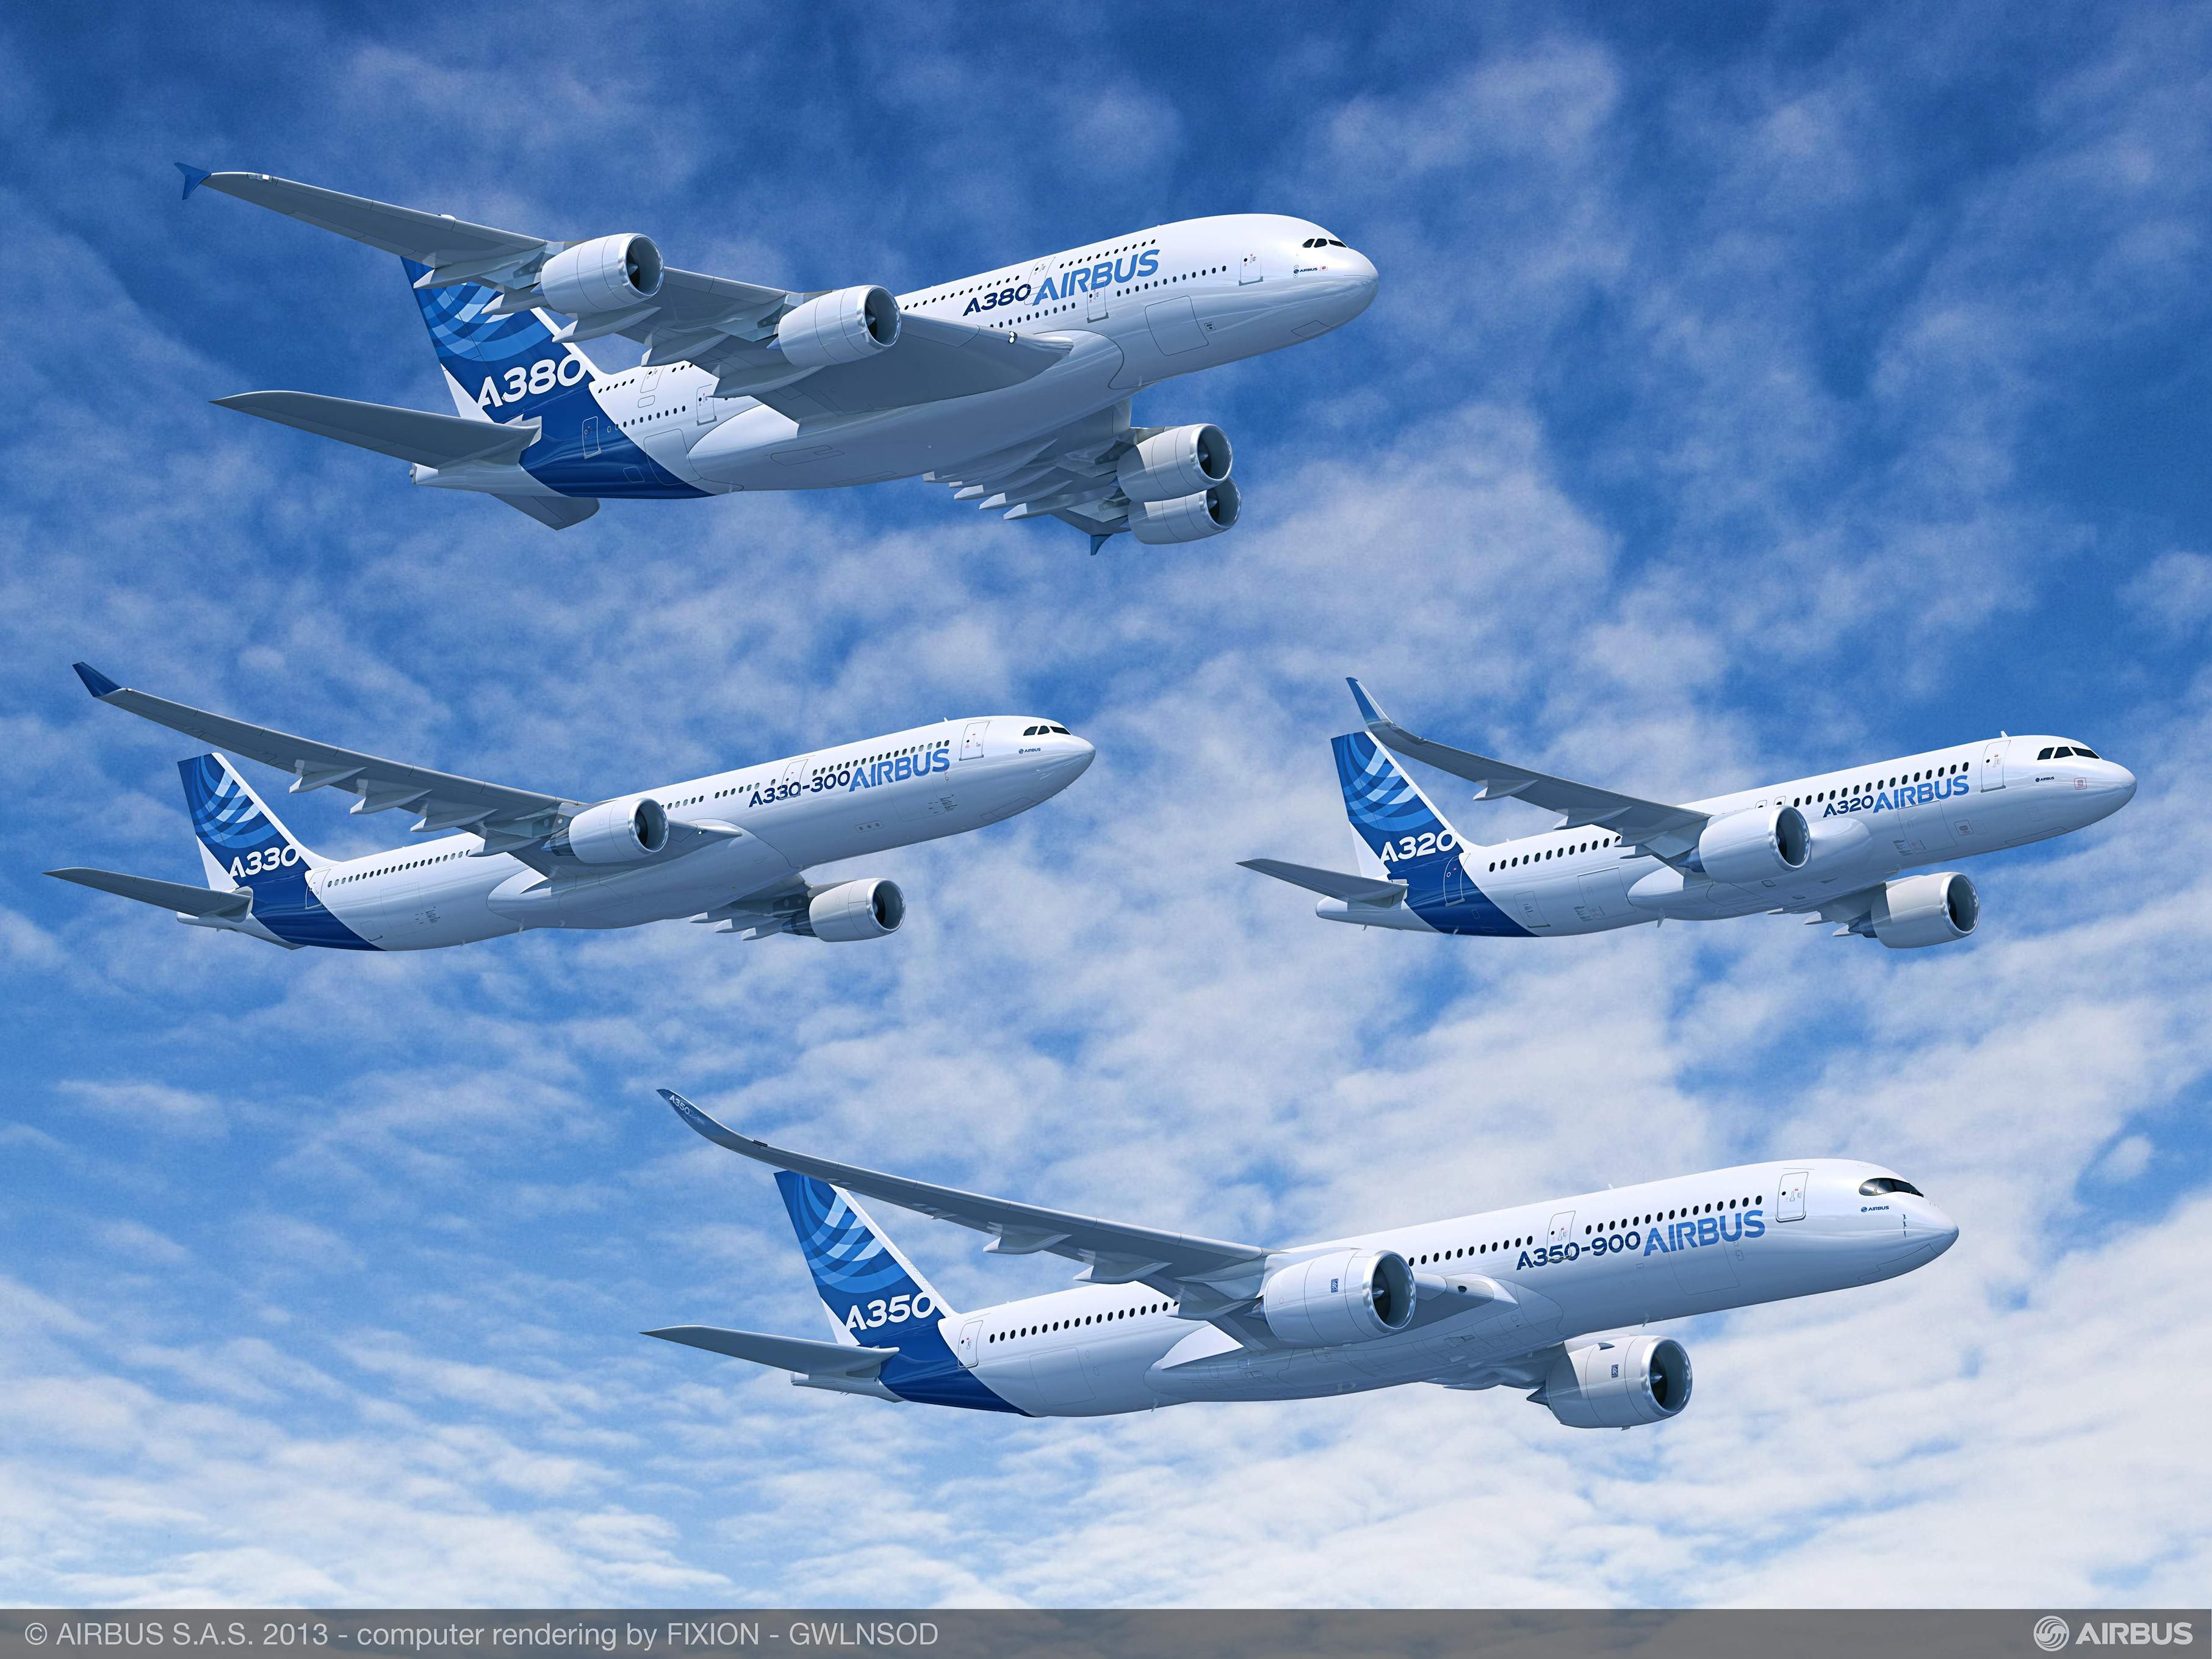 Airlines Ordered 369 Airbus Aircrafts